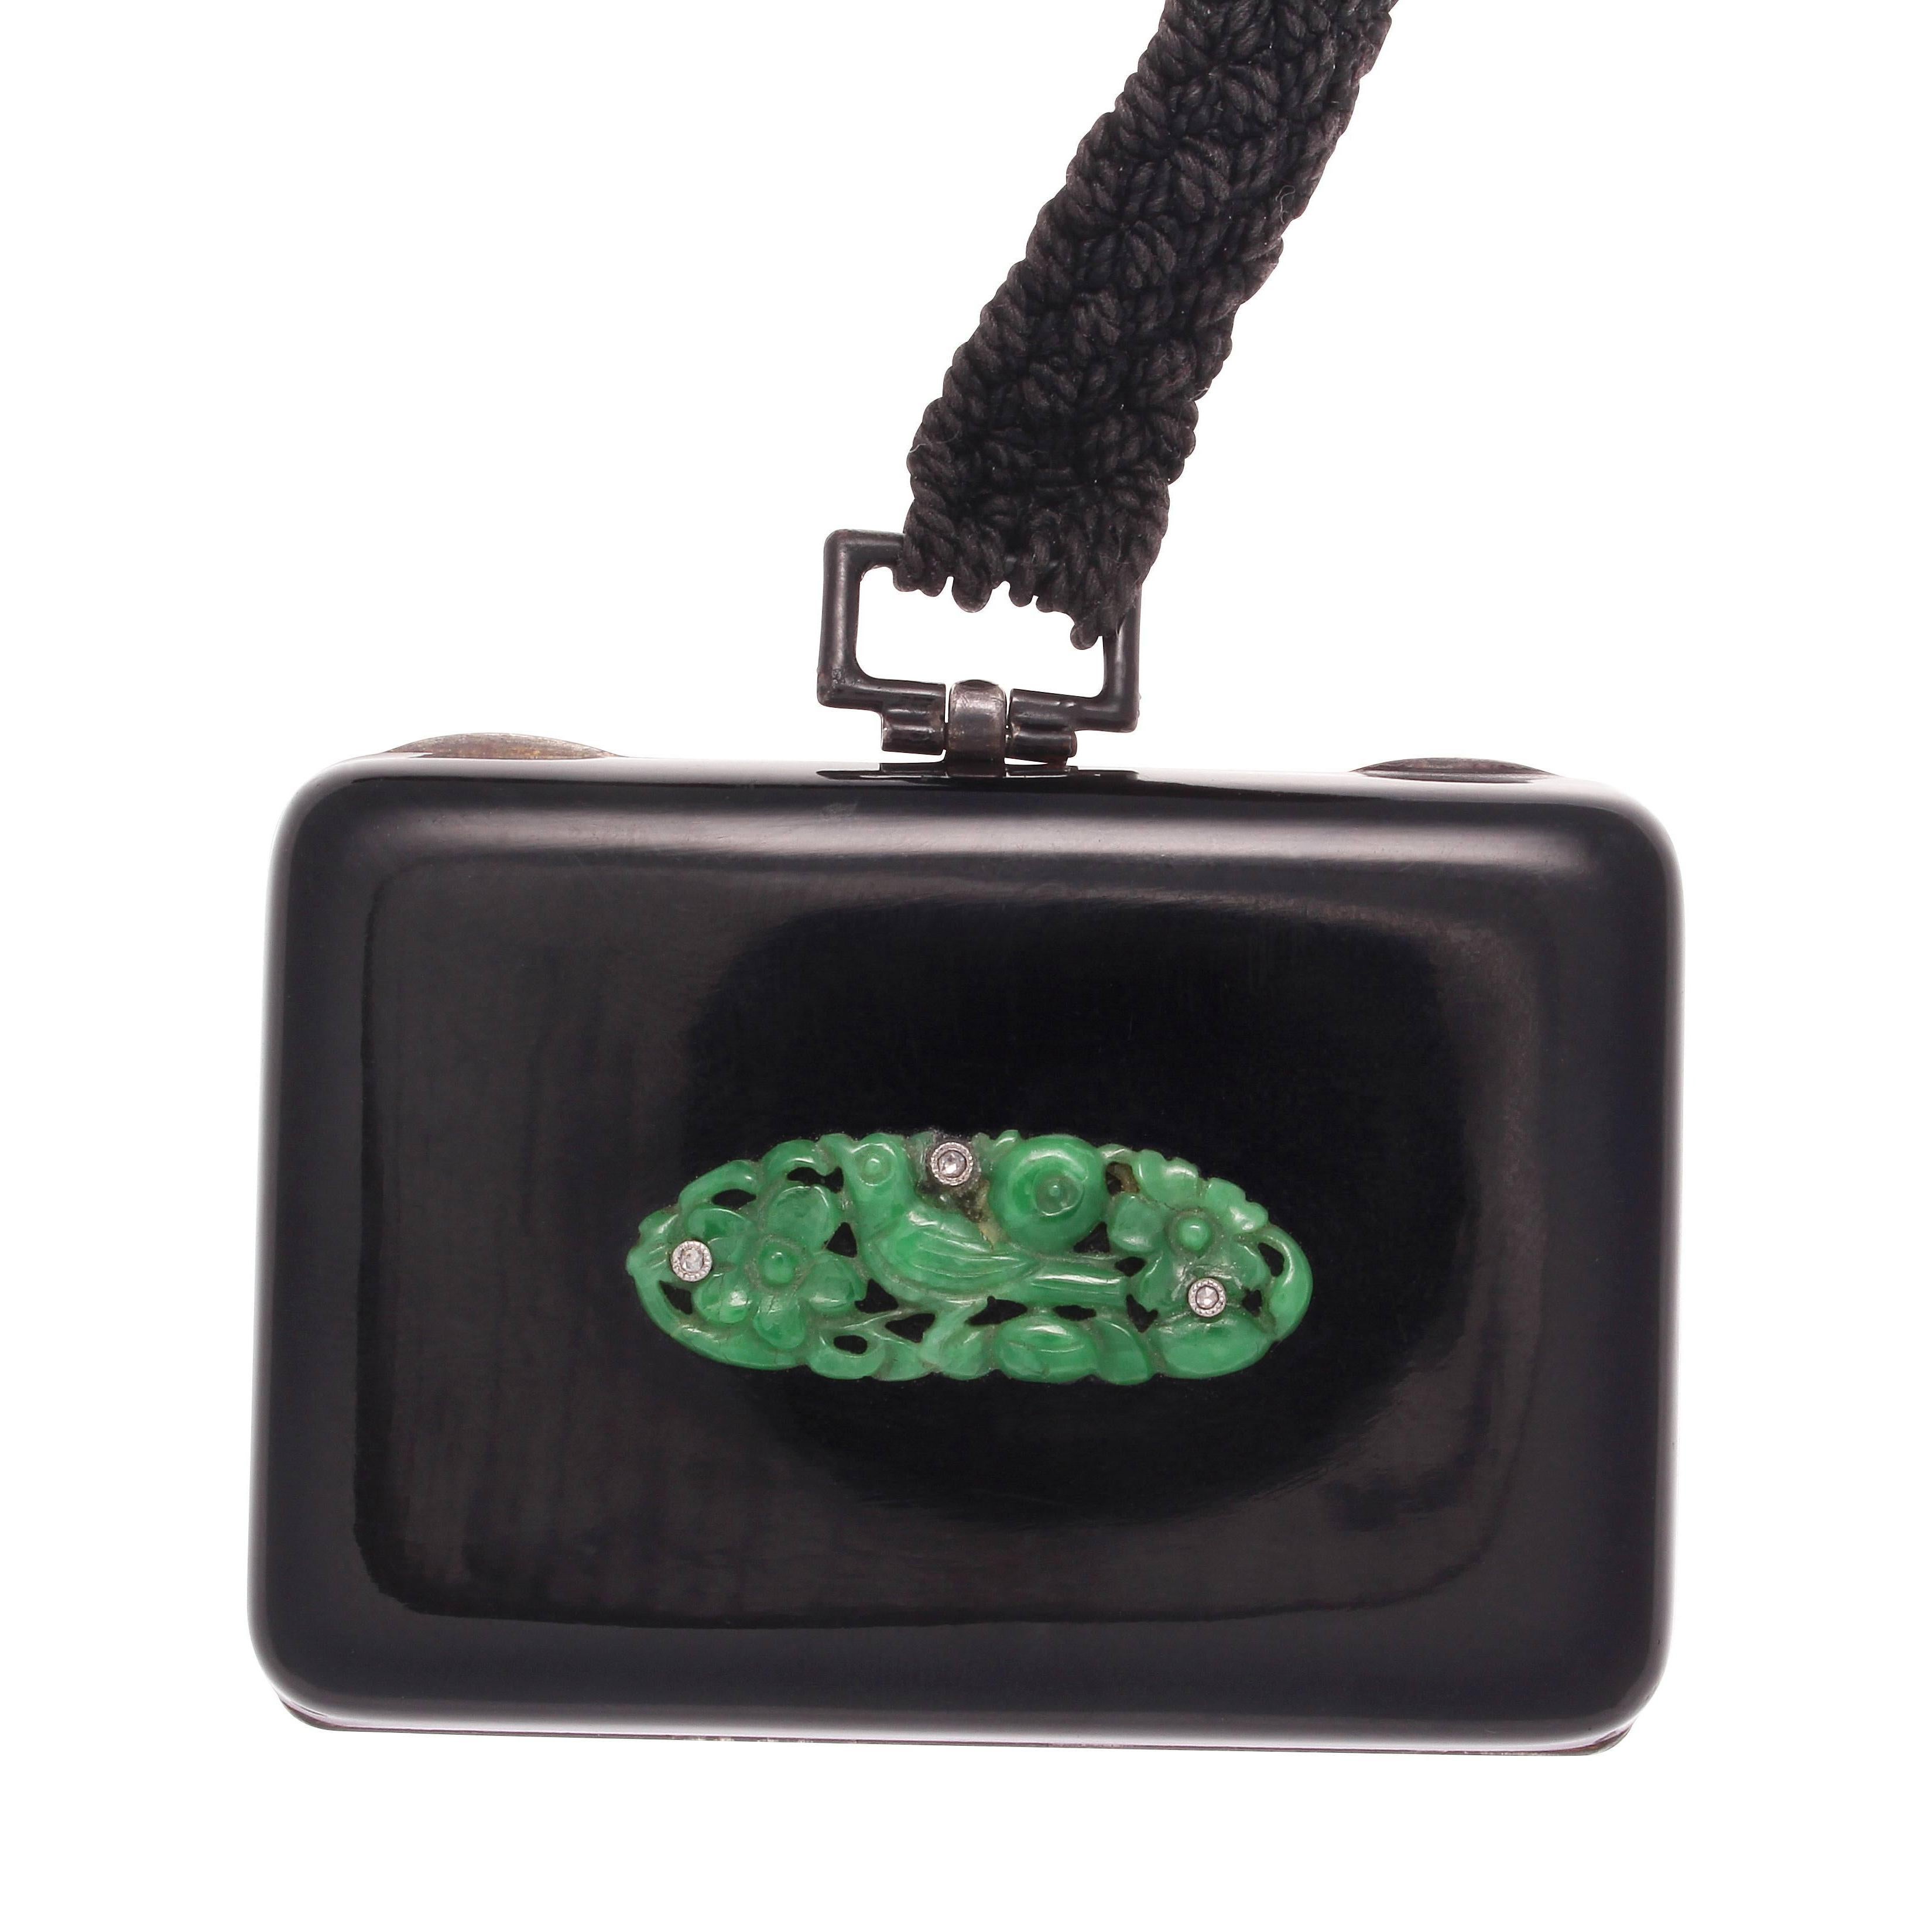 Style is something that never lacks in the creations of French designers. A lovely compact with jet black enamel coating the 18k gold box. The carved jade depicts a bird feeding in a green garden filled with diamonds. Stamped with French hallmarks.